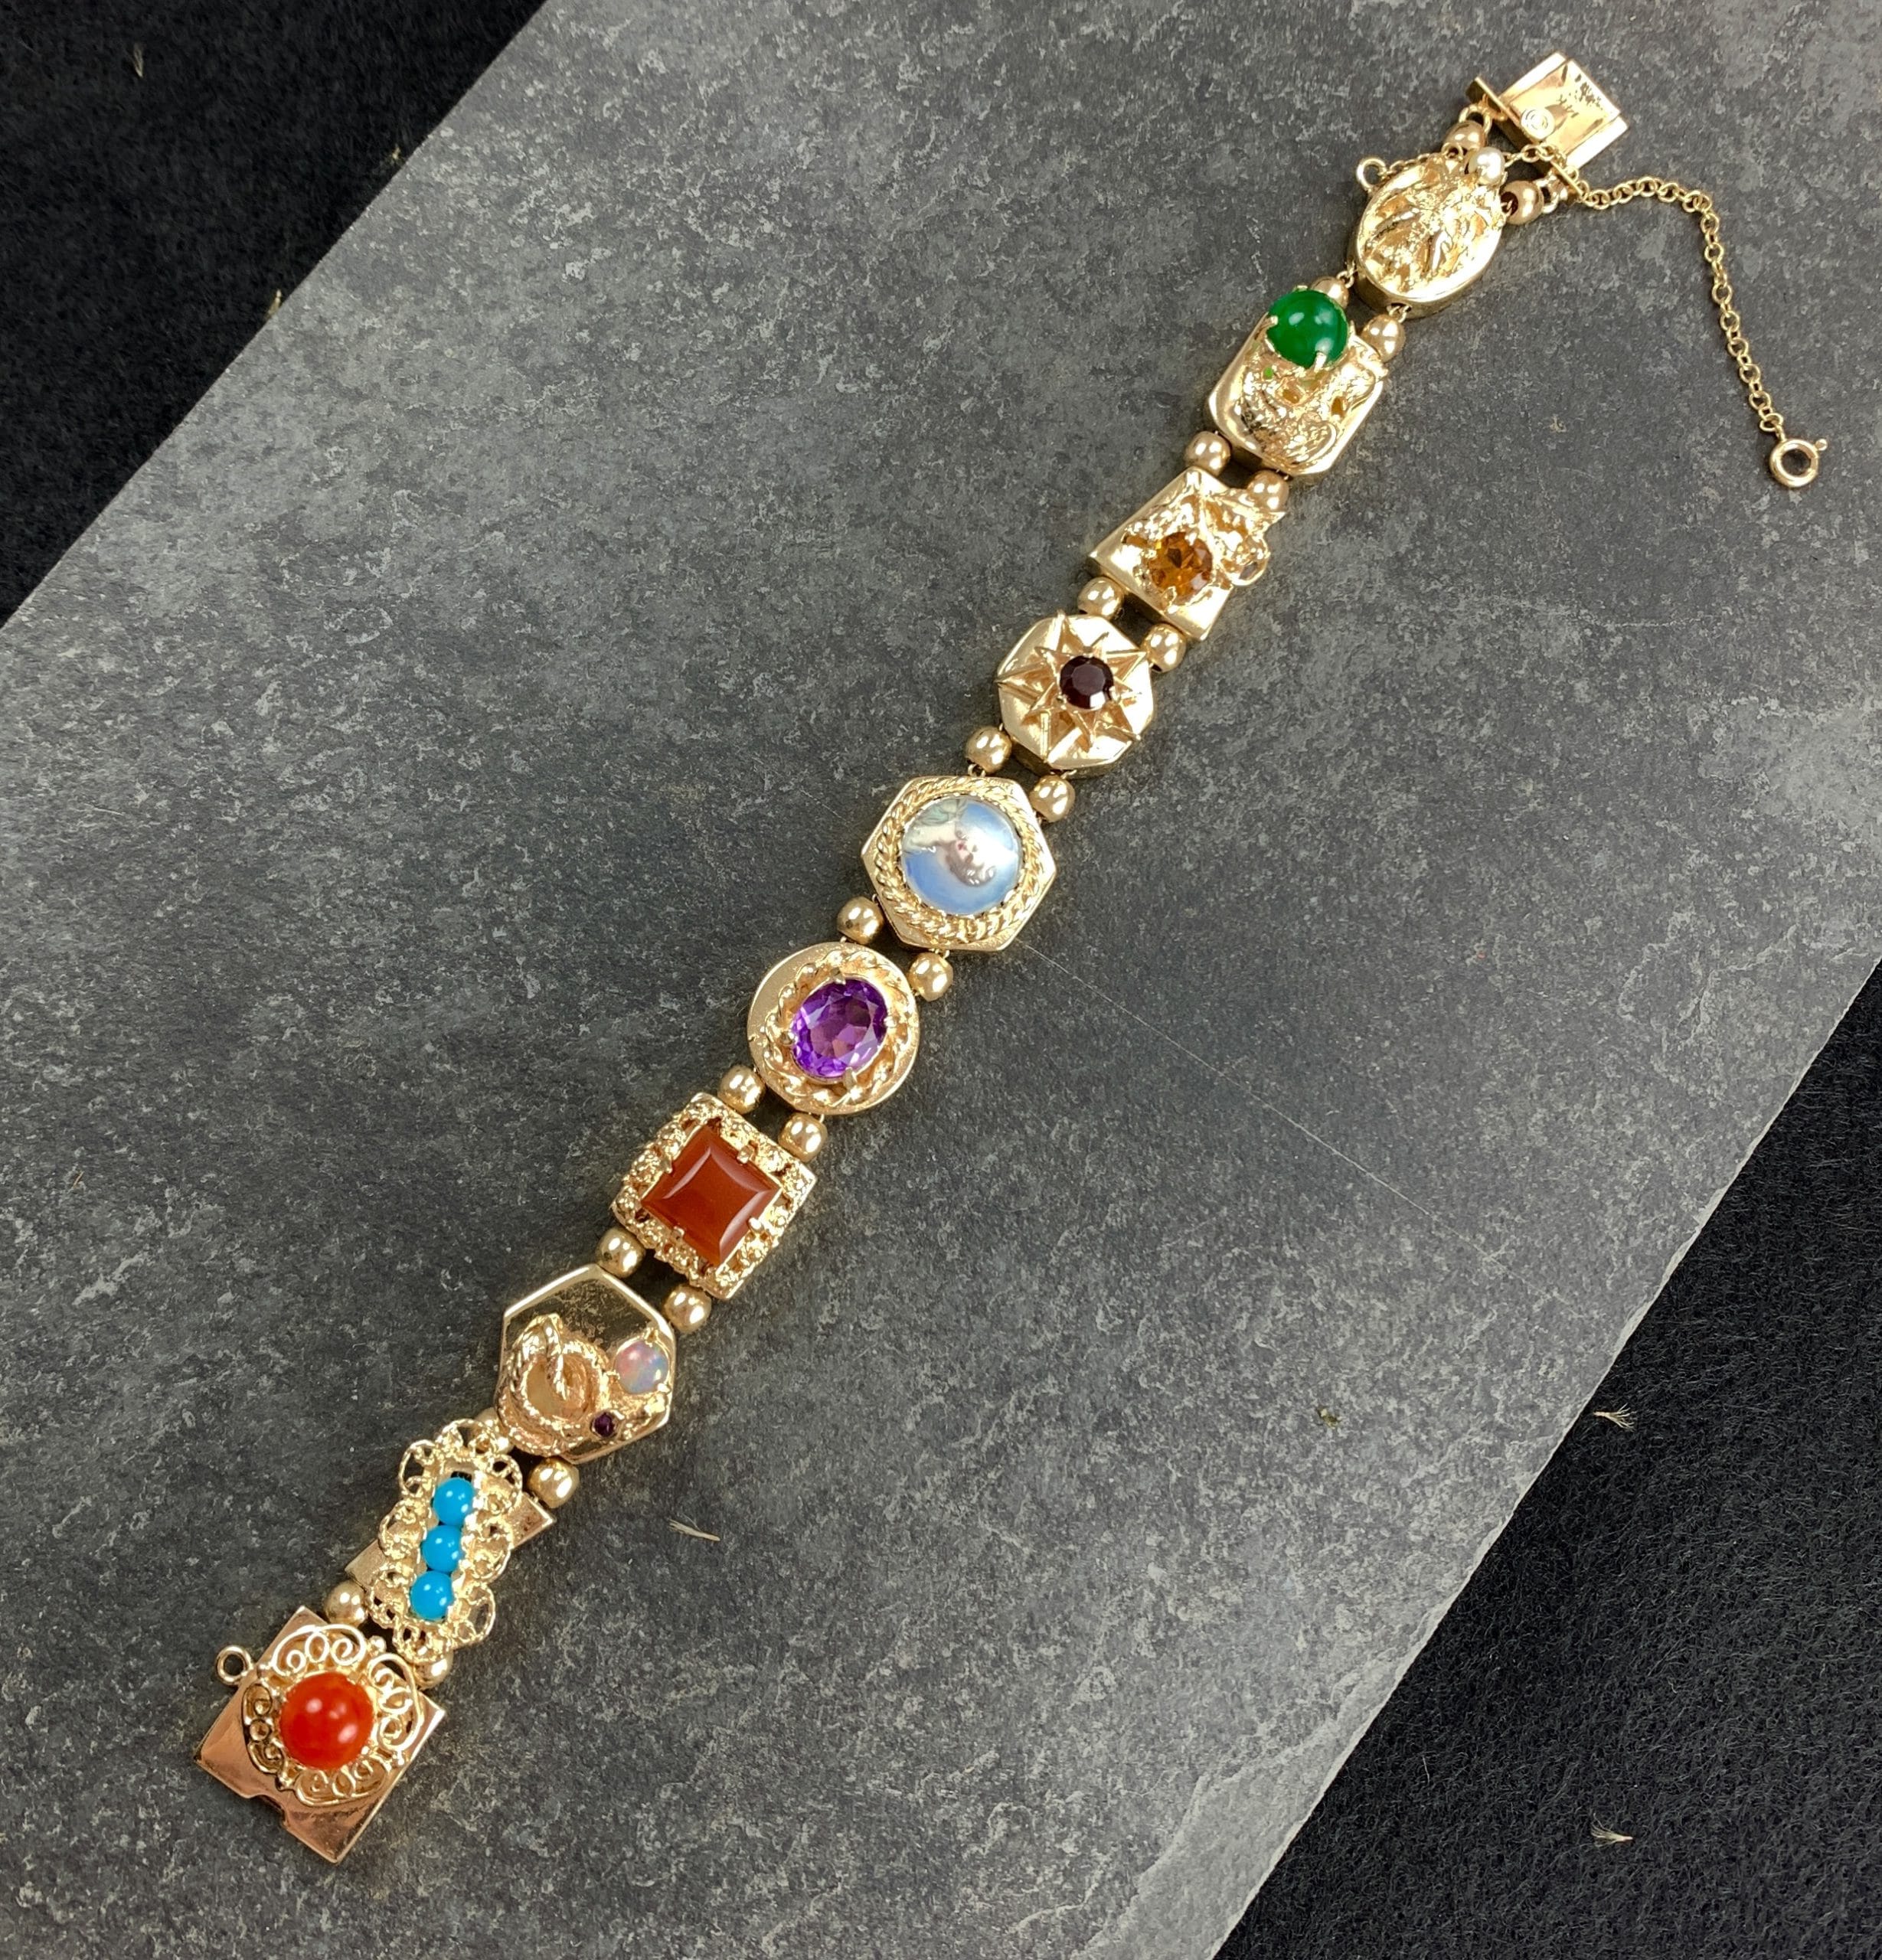 Vintage Artistic Multi Stone Groves, Big Webster Bracelet Gems | | and Gold 7821 MO Blvd. (A2486) with | - Summit 14k in Bend 63119 Jewelers Enamel Yellow